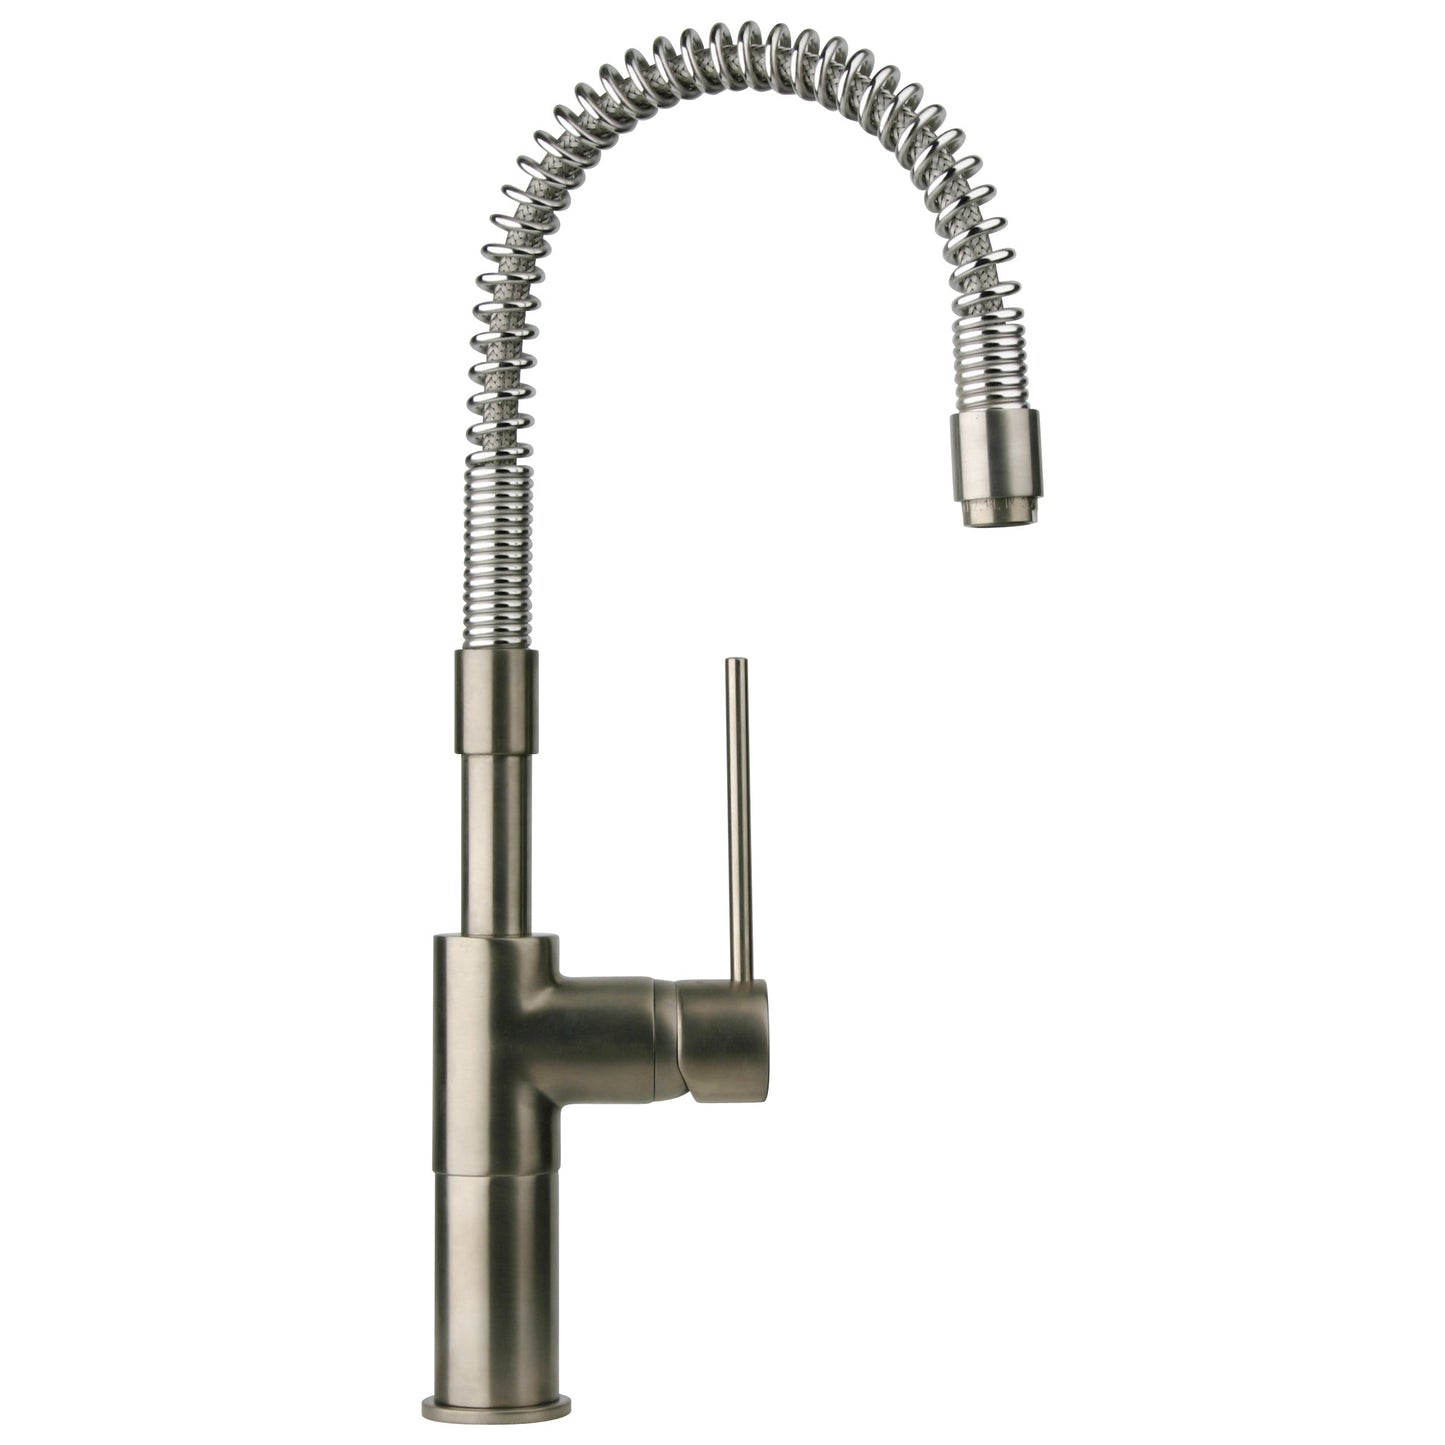 LaToscana Brushed Nickel Single Hole Deck Mounted Pull-Down Kitchen Faucet With Spring Spout